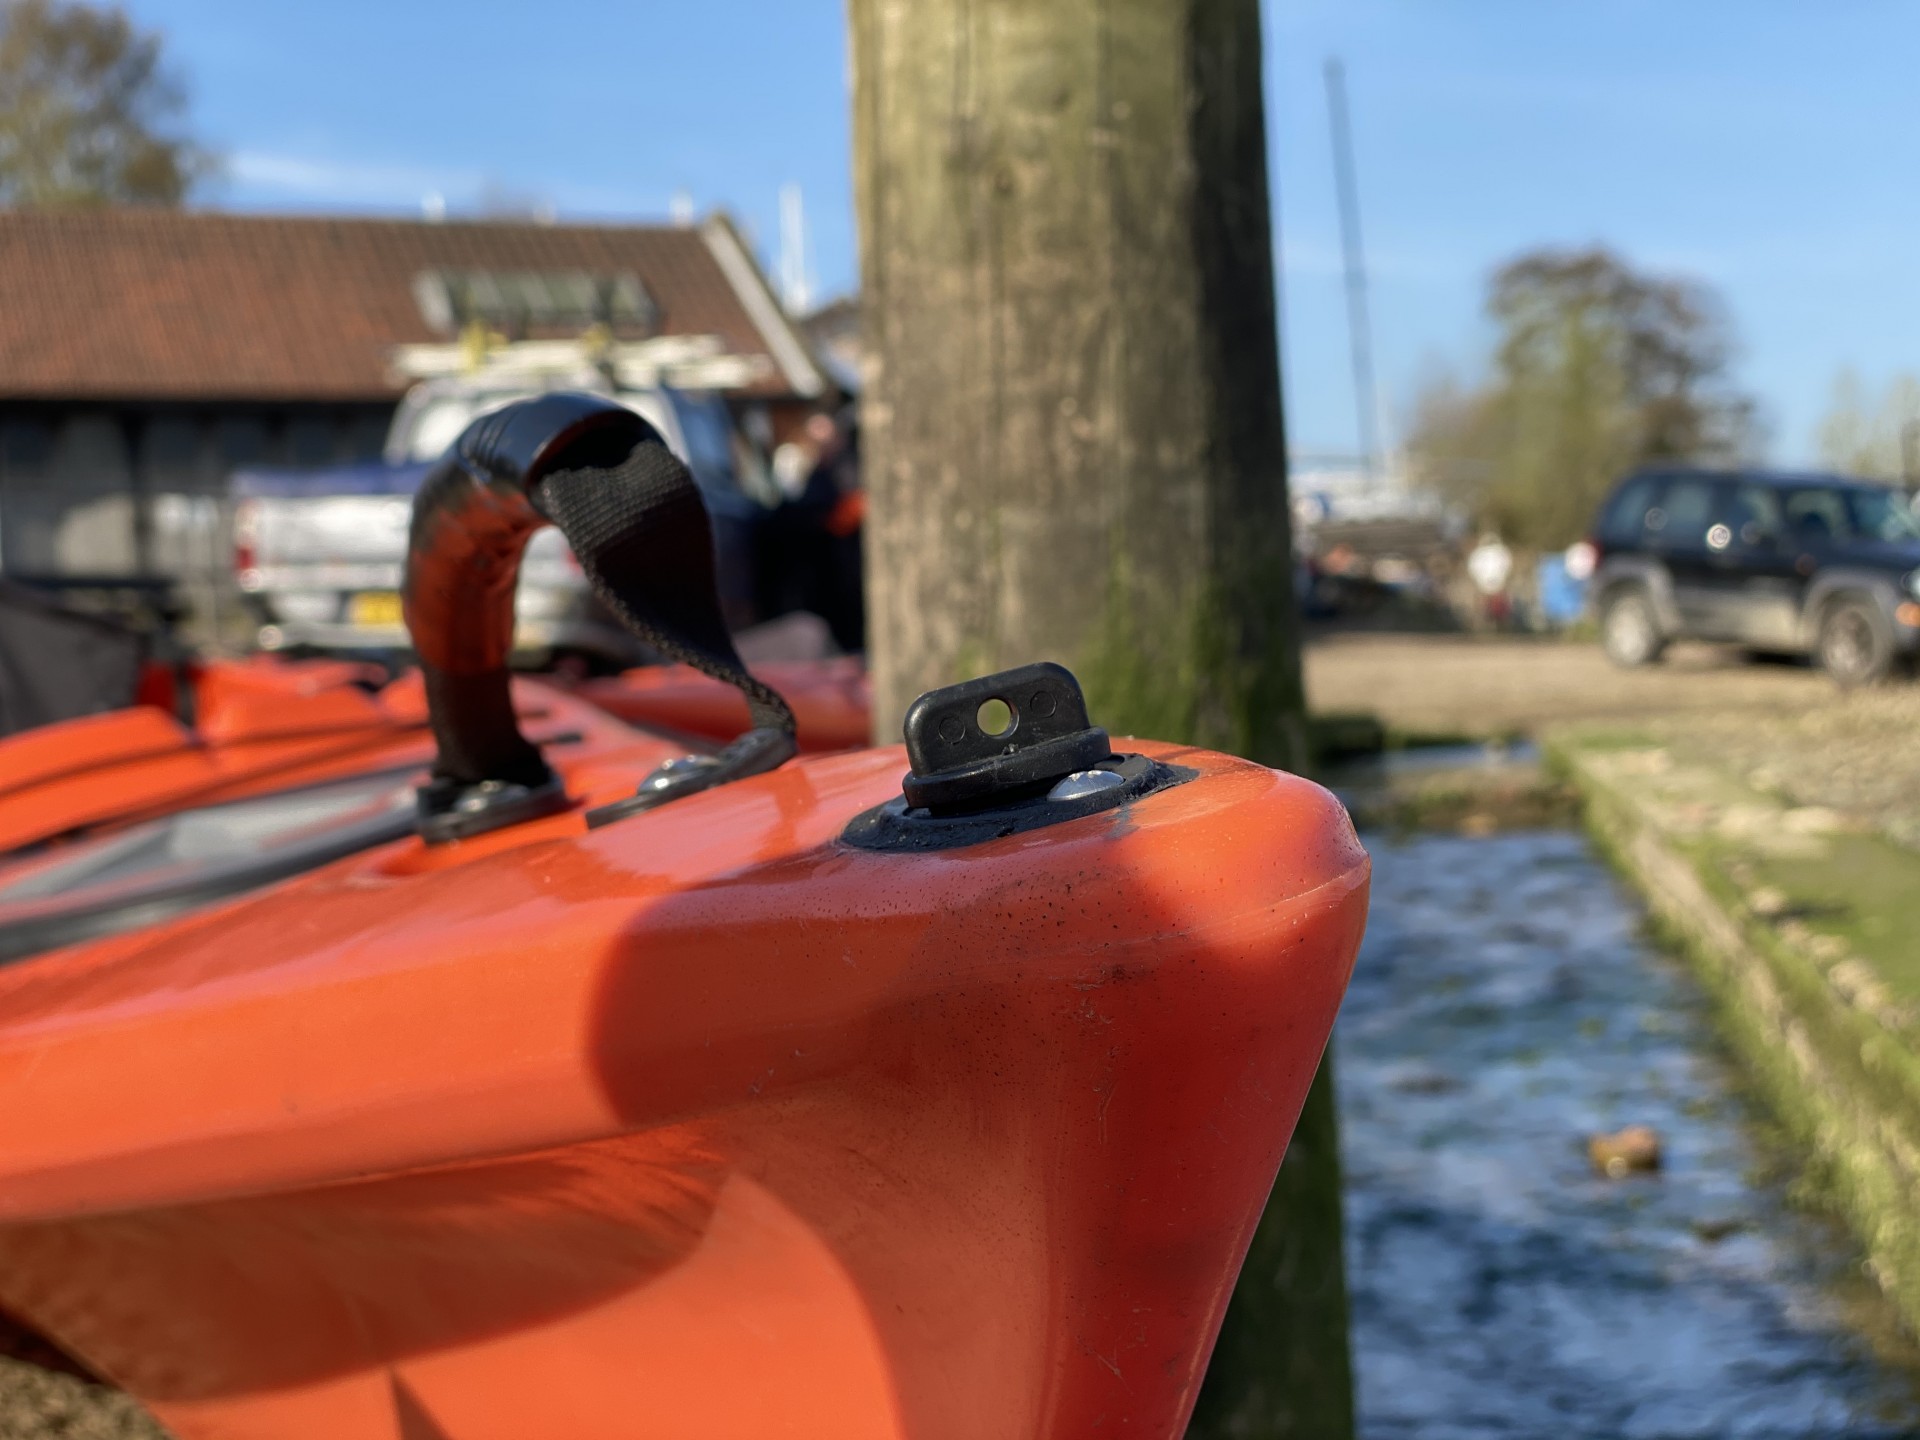 The bow of an orange sit-on-top kayak showing the drainage plug.